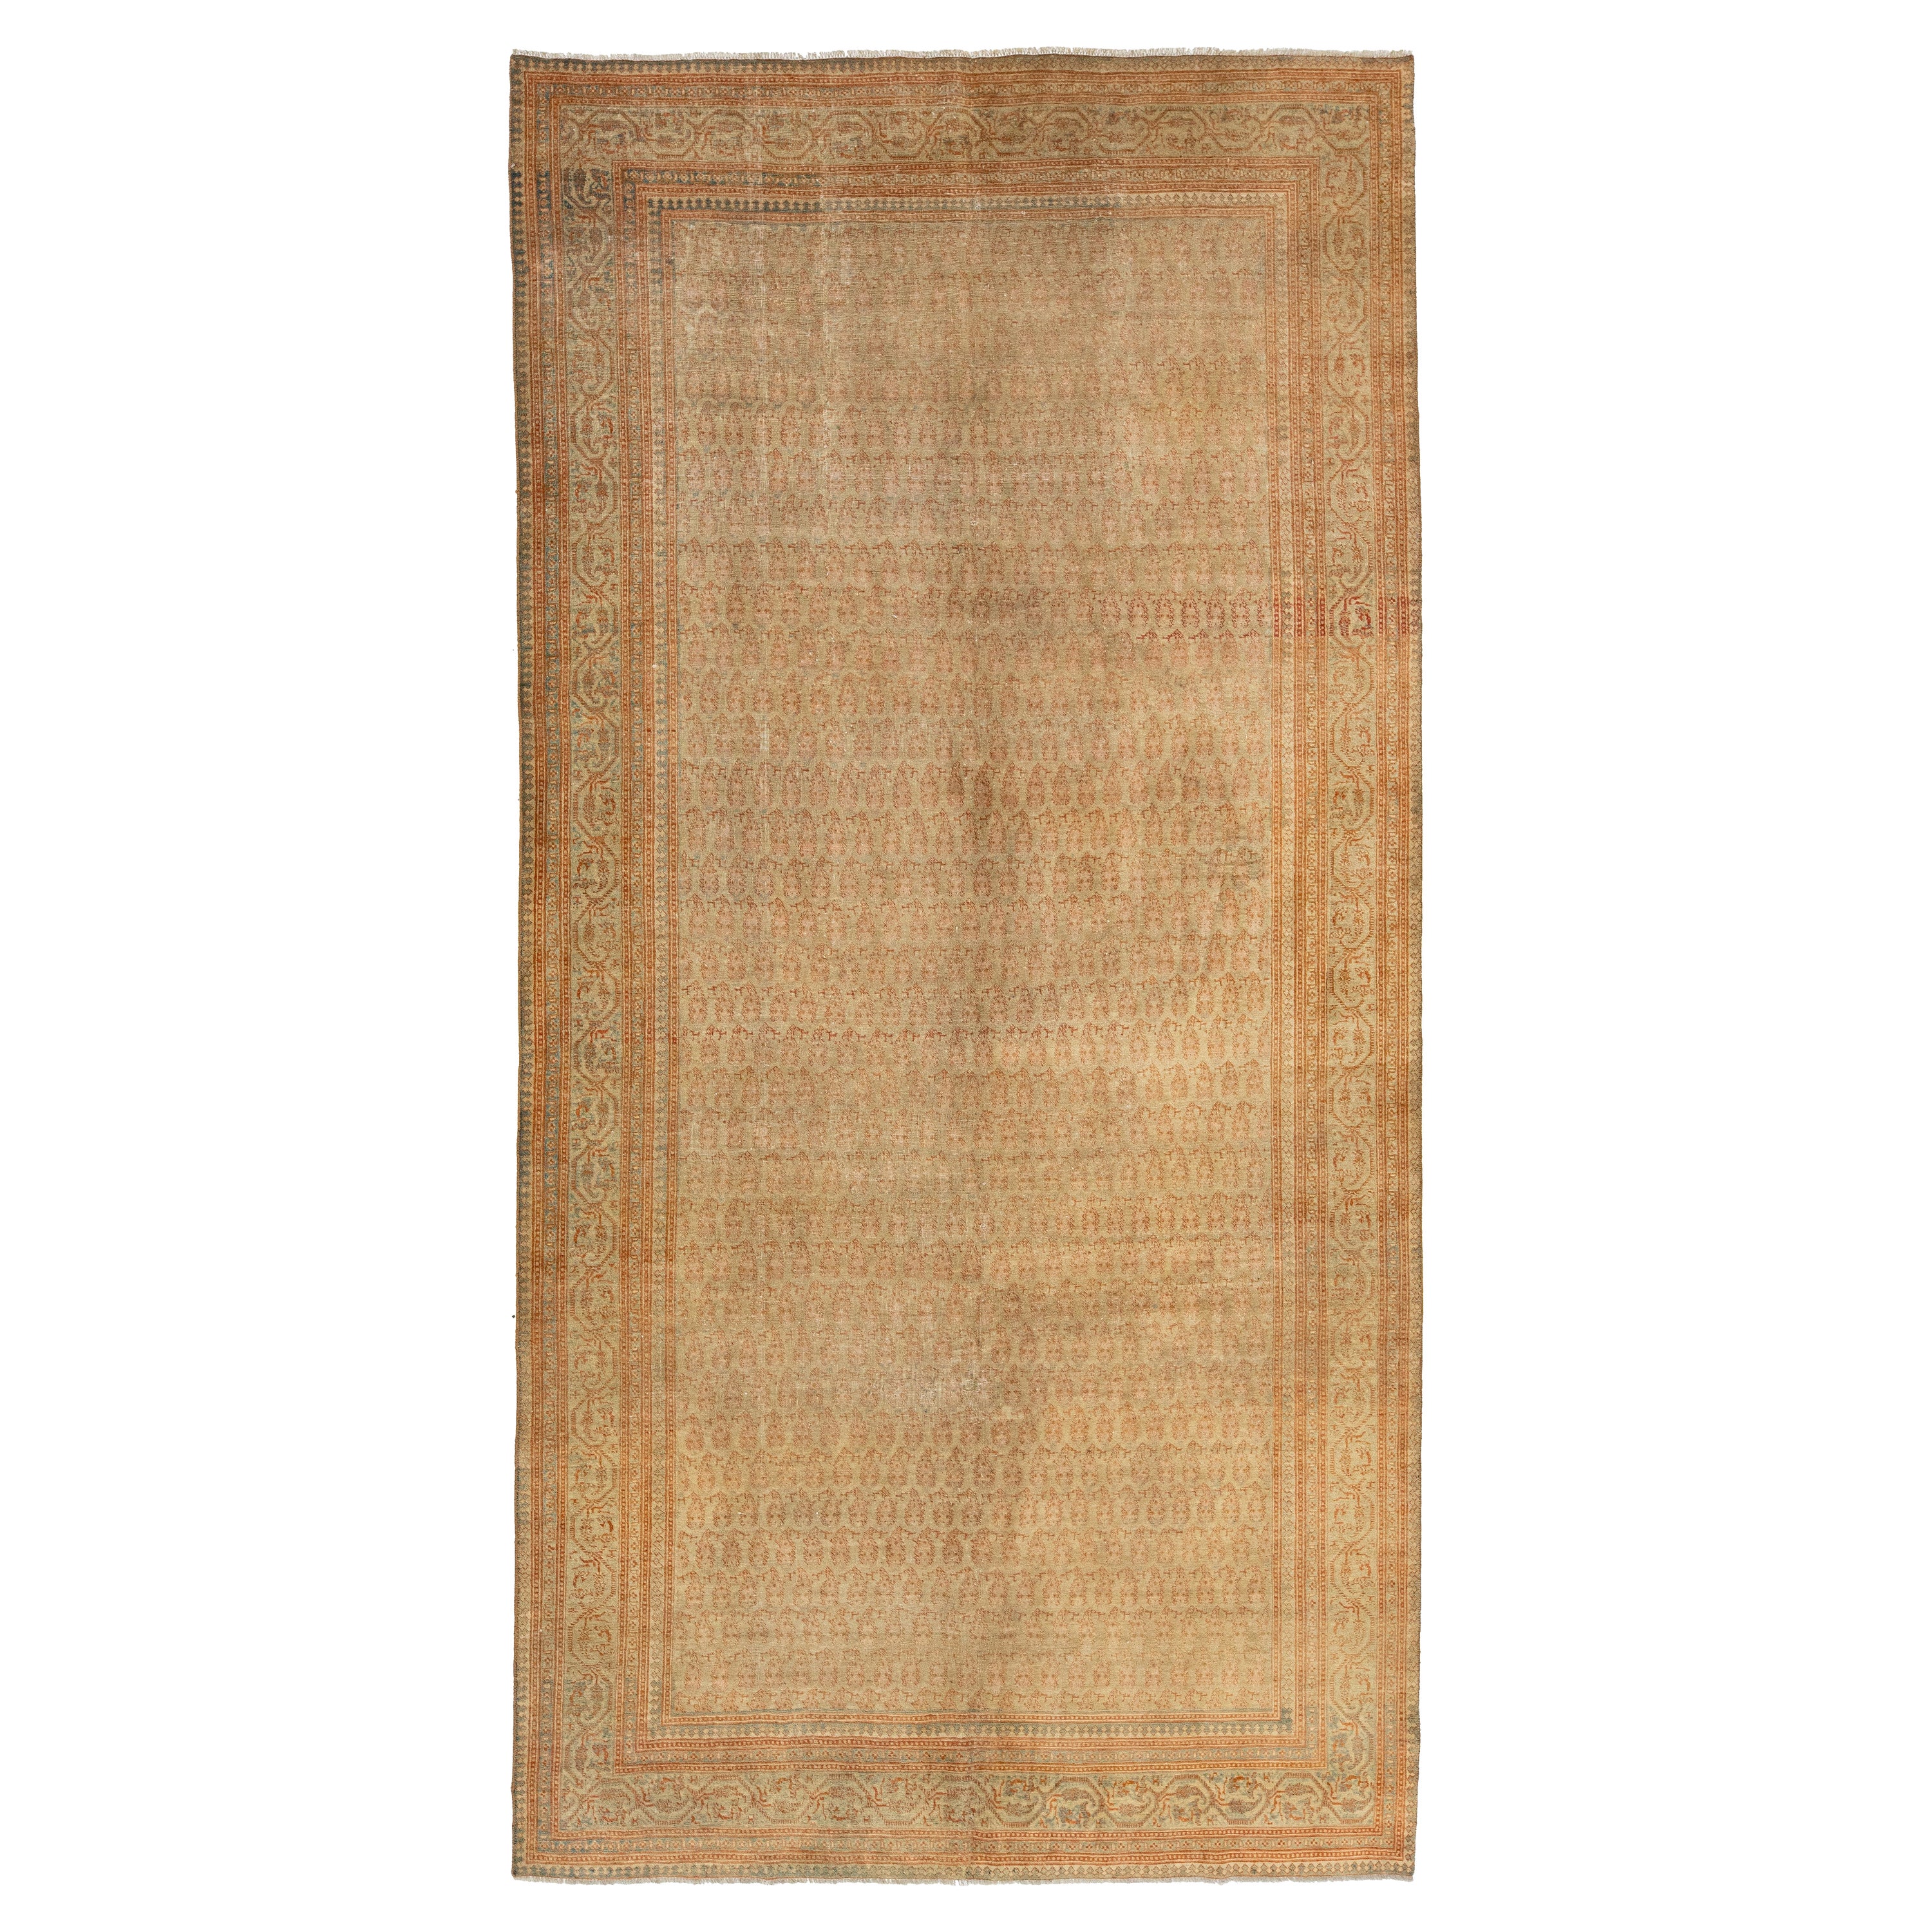 1920s Antique Sivas Gallery Wool rug In Beige Tan Color With Allover Pattern For Sale